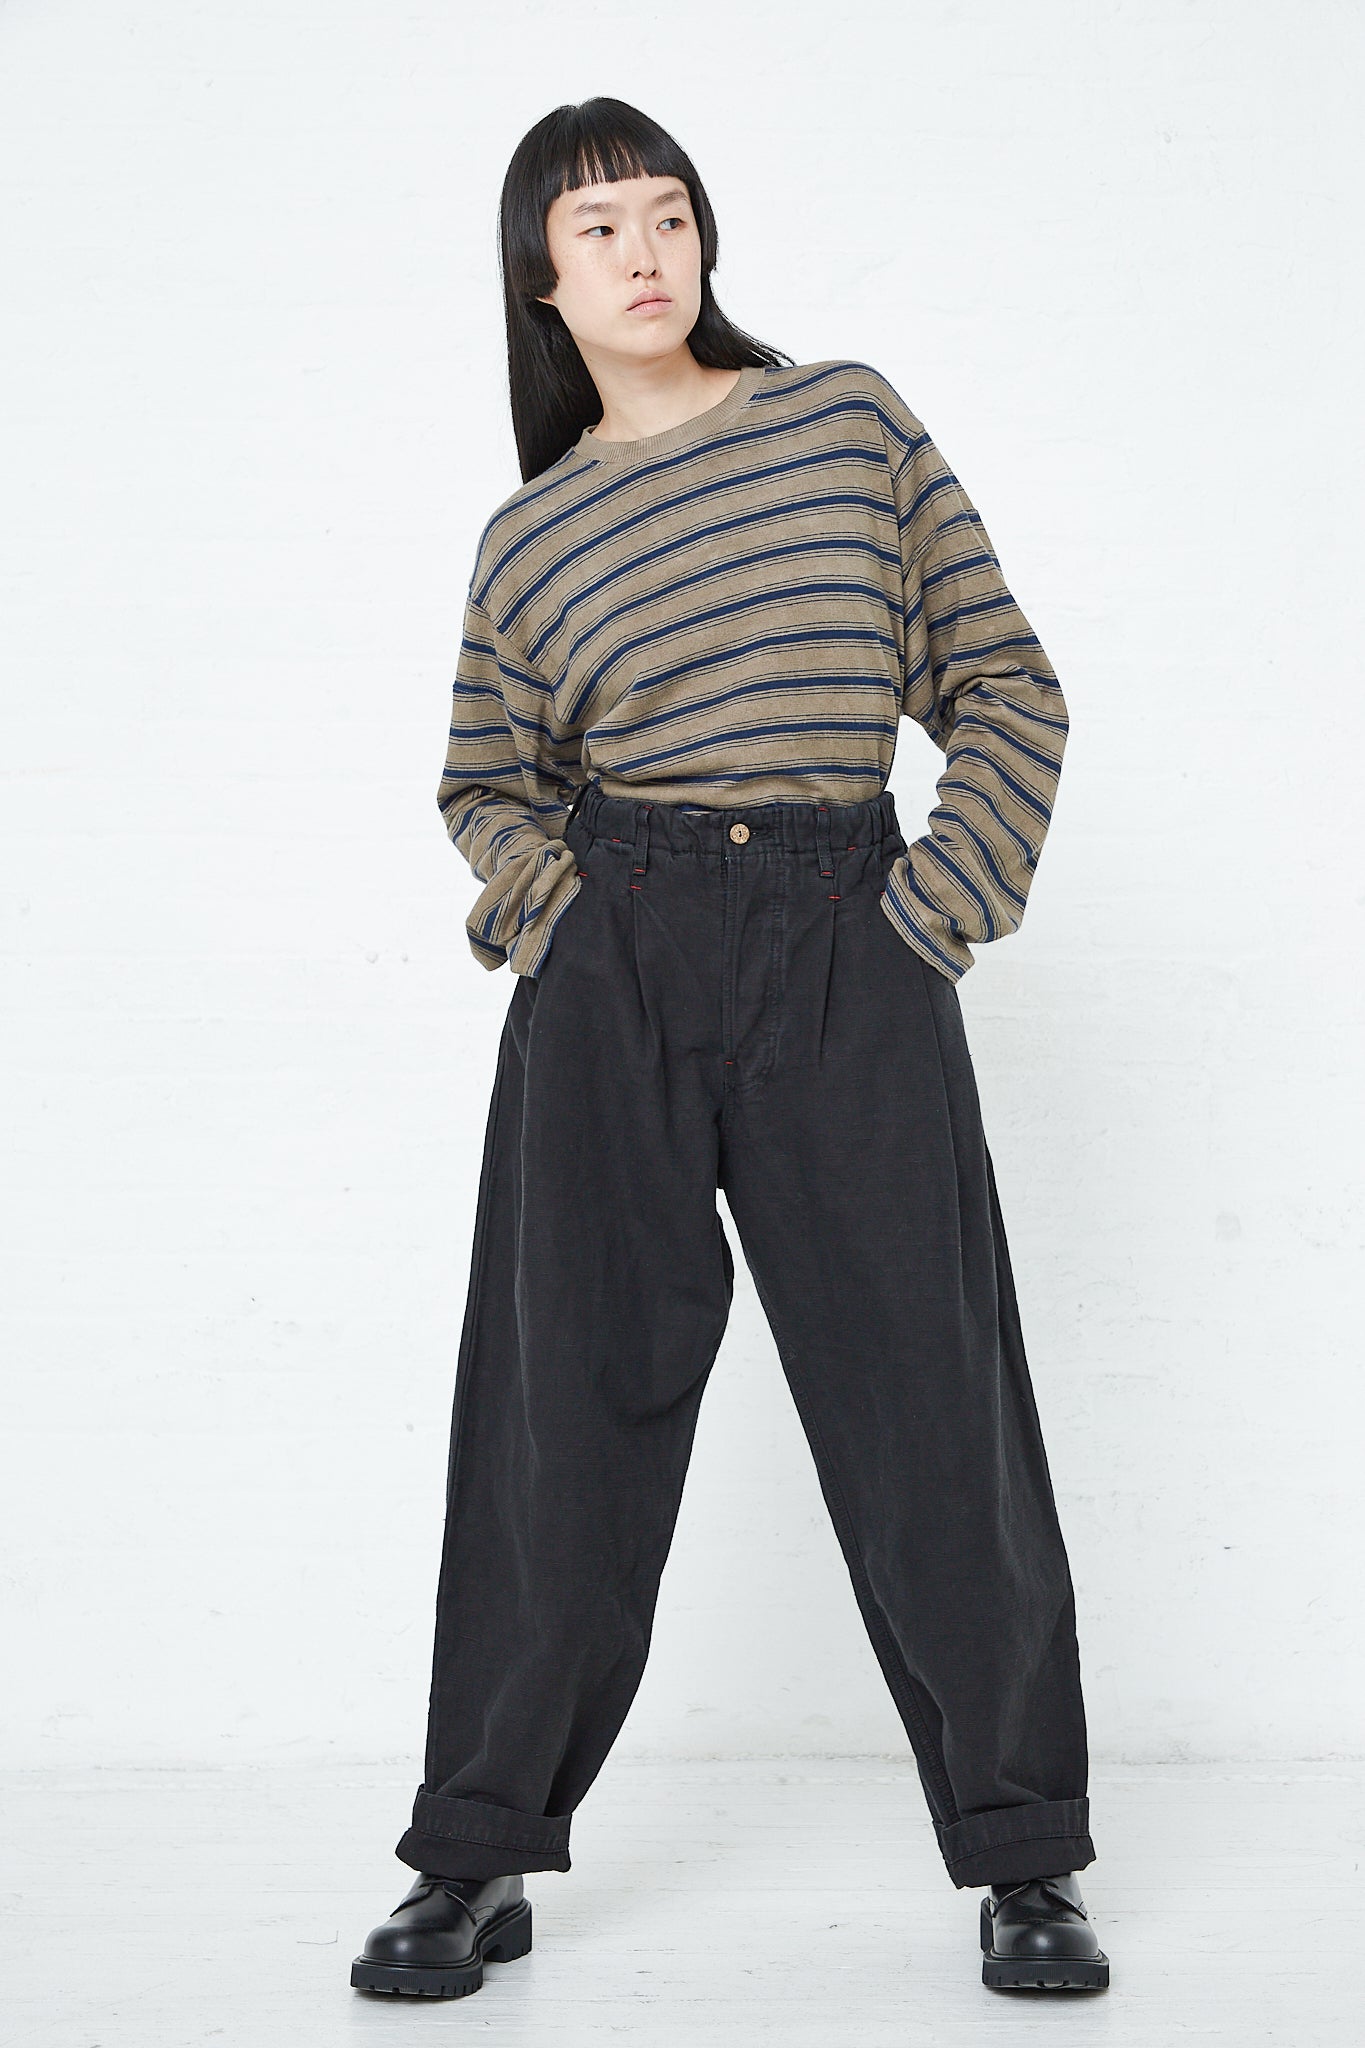 A woman wearing the Dr. Collectors 9 oz. Cotton and Hemp P40 Z Boys Military Pant in Sulfur Black with an elasticated waistband, paired with a striped sweater.